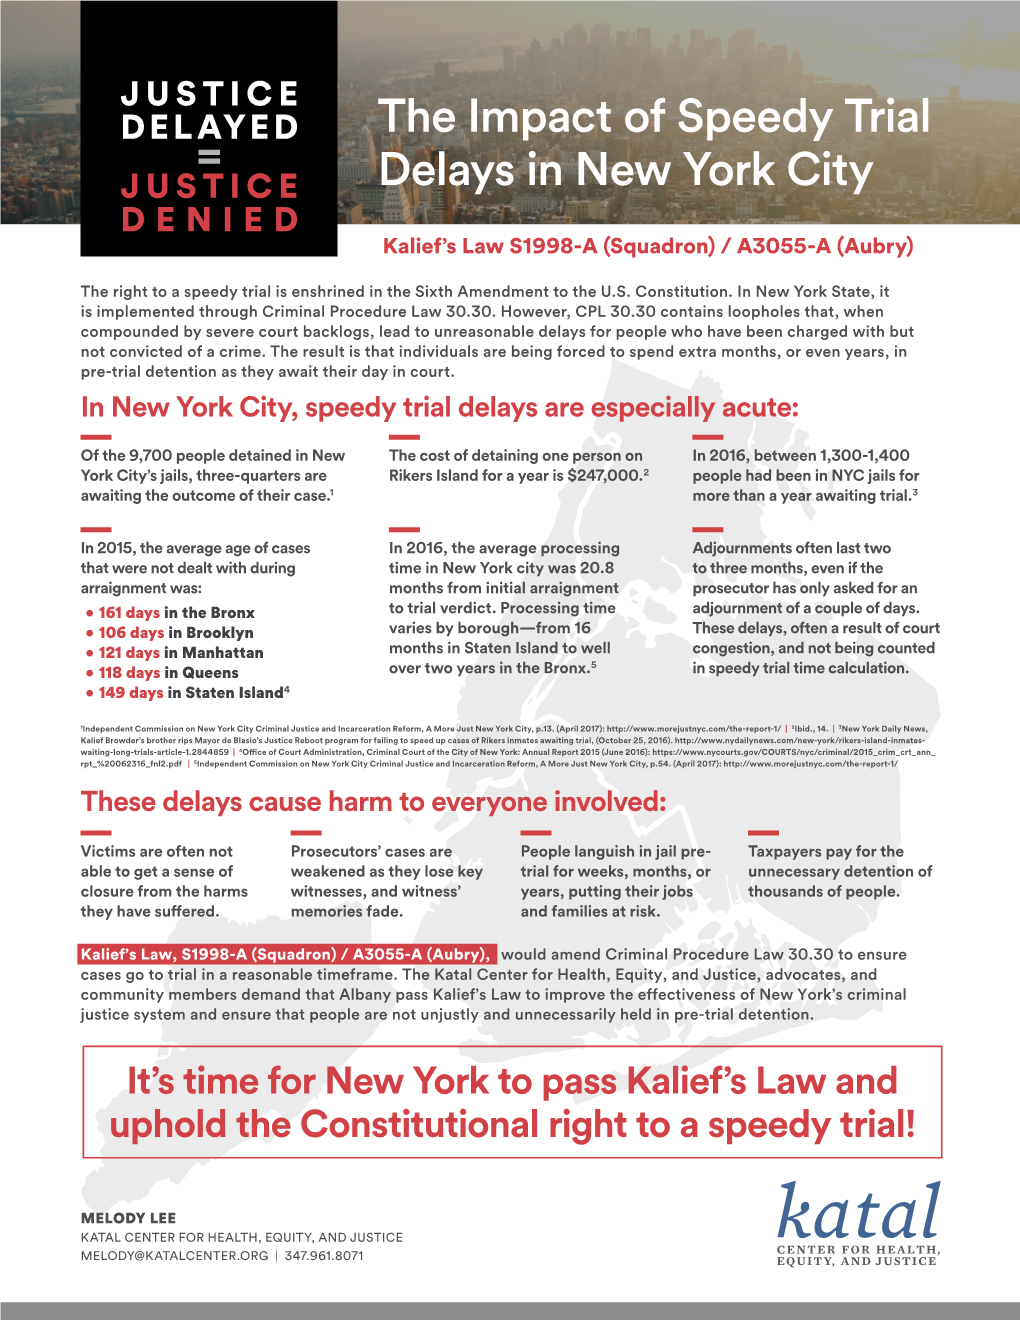 The Impact of Speedy Trial Delays in New York City